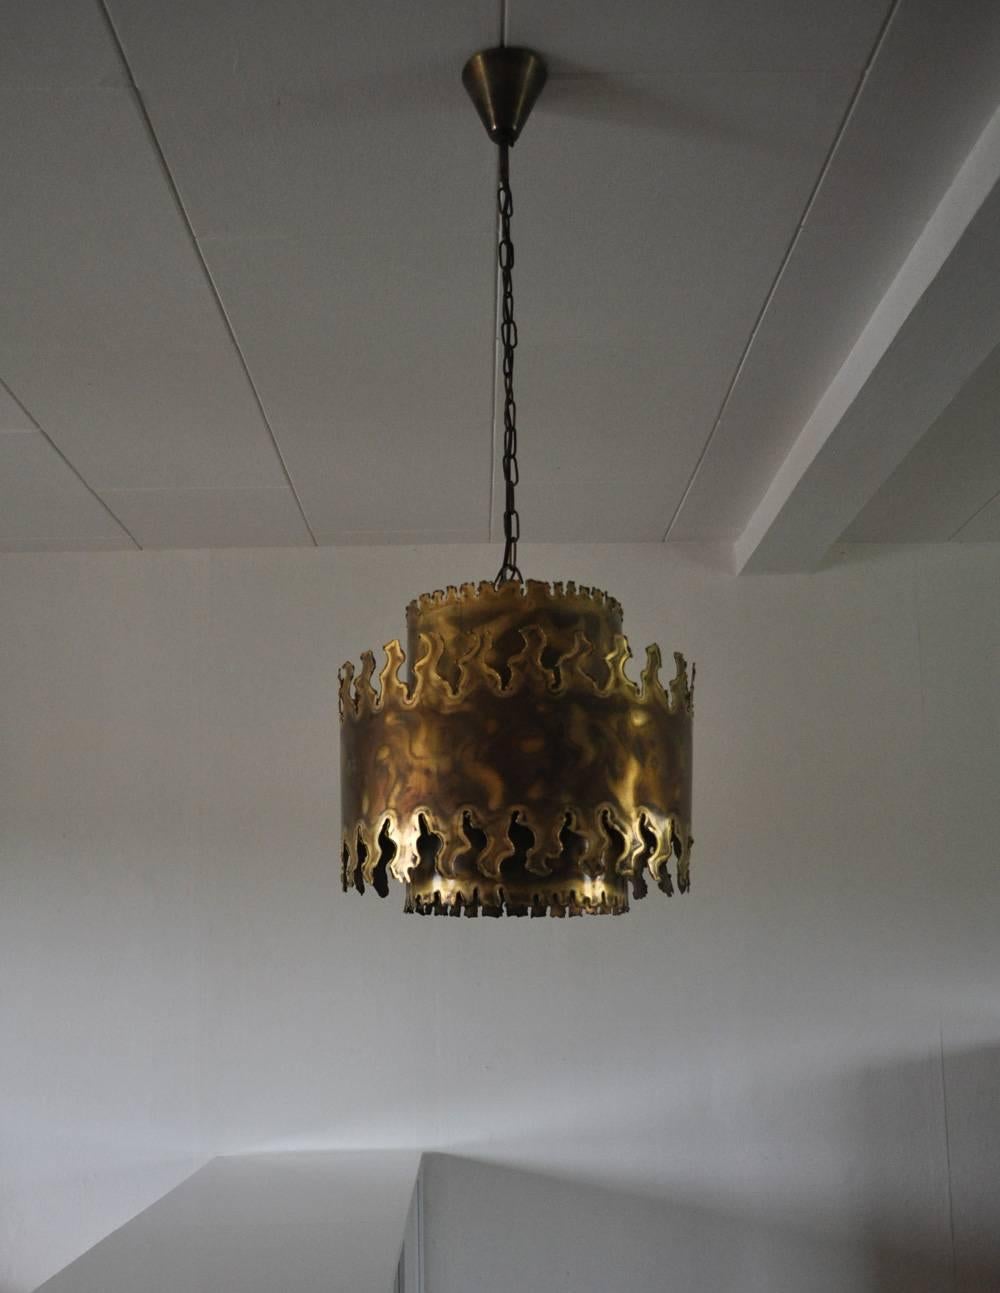 Large ceiling lamp designed by Svend Aage Holm Sørensen in the 1960s in Denmark. Manufactured by Holm Sørensen & Co. The lamp is made of torch cut brass and the shades gives an amazing light effect. It hangs from the original brass coloured chain